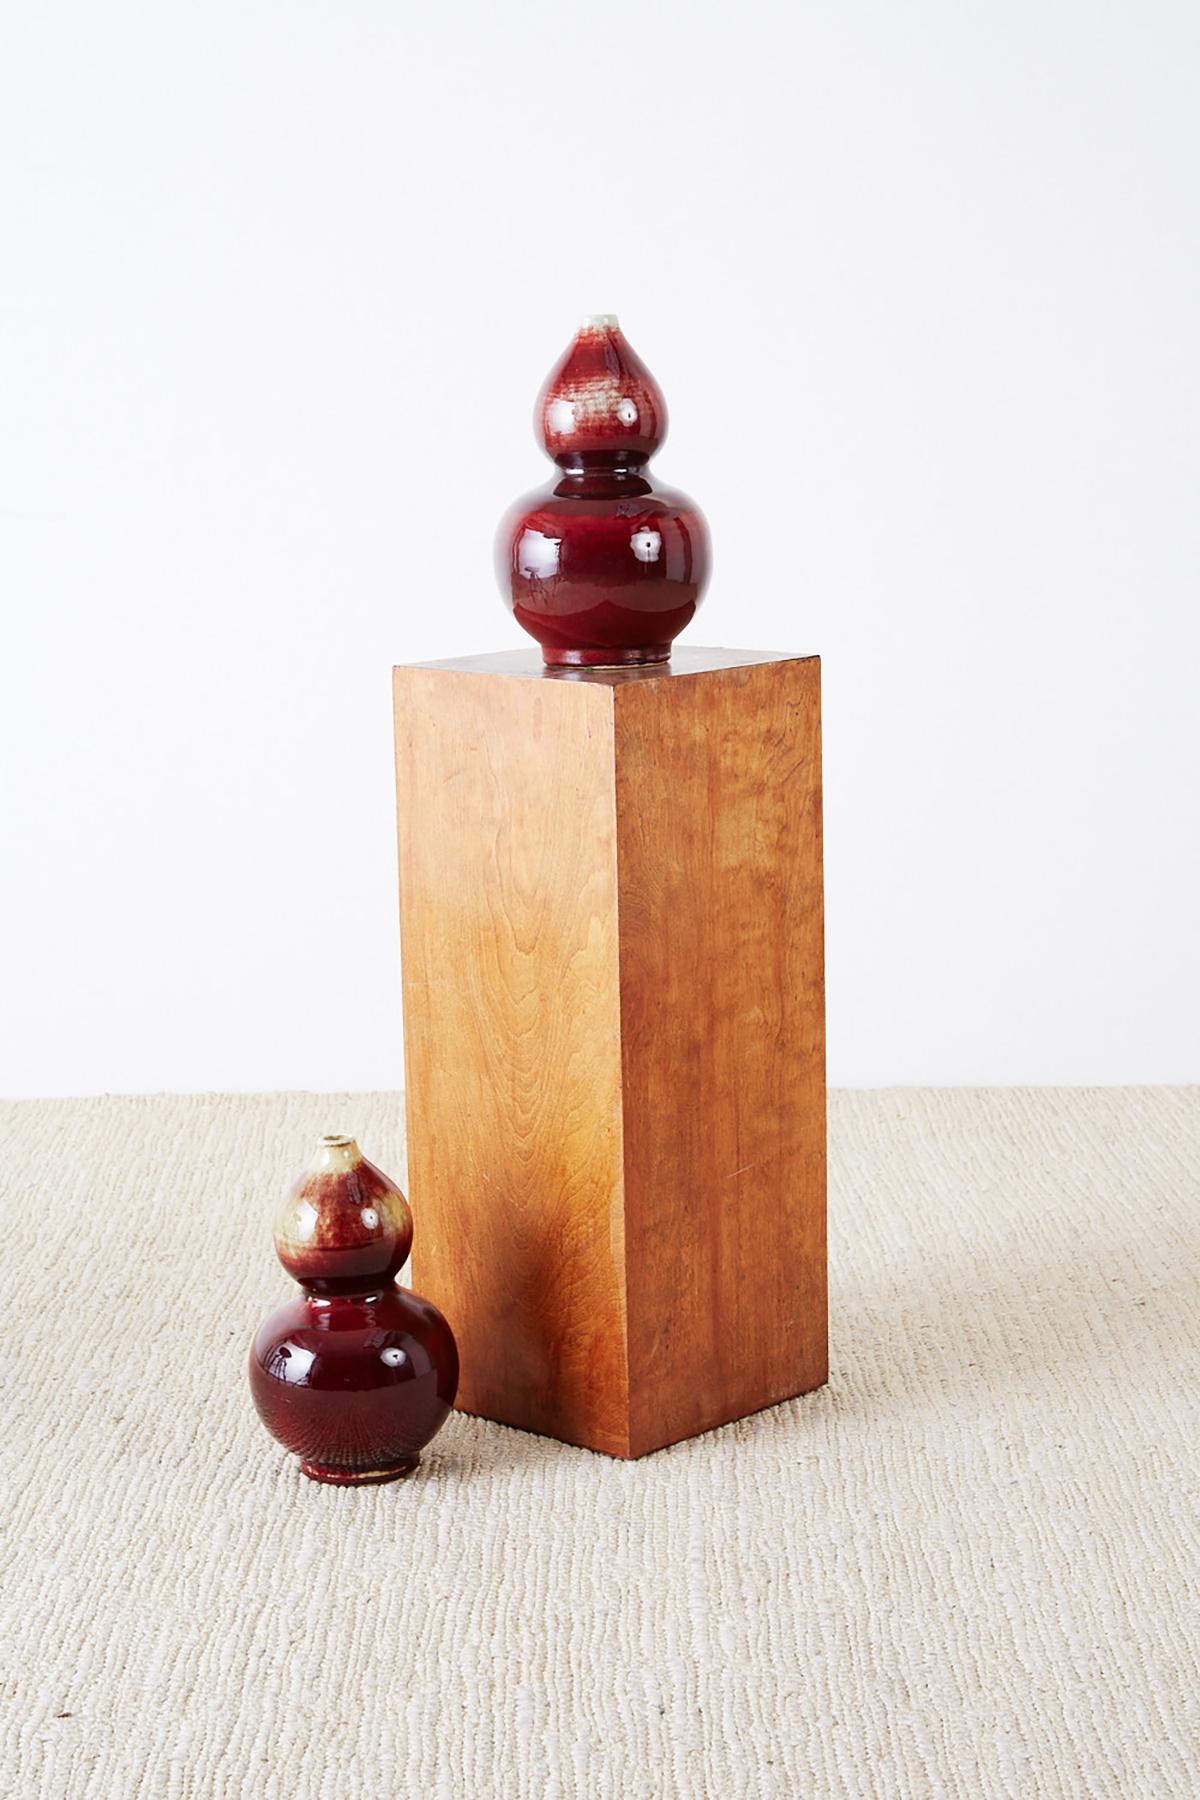 Outstanding pair of Chinese late 19th century Lang Yao vases having a double gourd form. Featuring a rich oxblood sang de boeuf glaze with a fine craquelure in the finish. Each vase is very heavy weighing 7 lbs with a beautiful under glaze showing